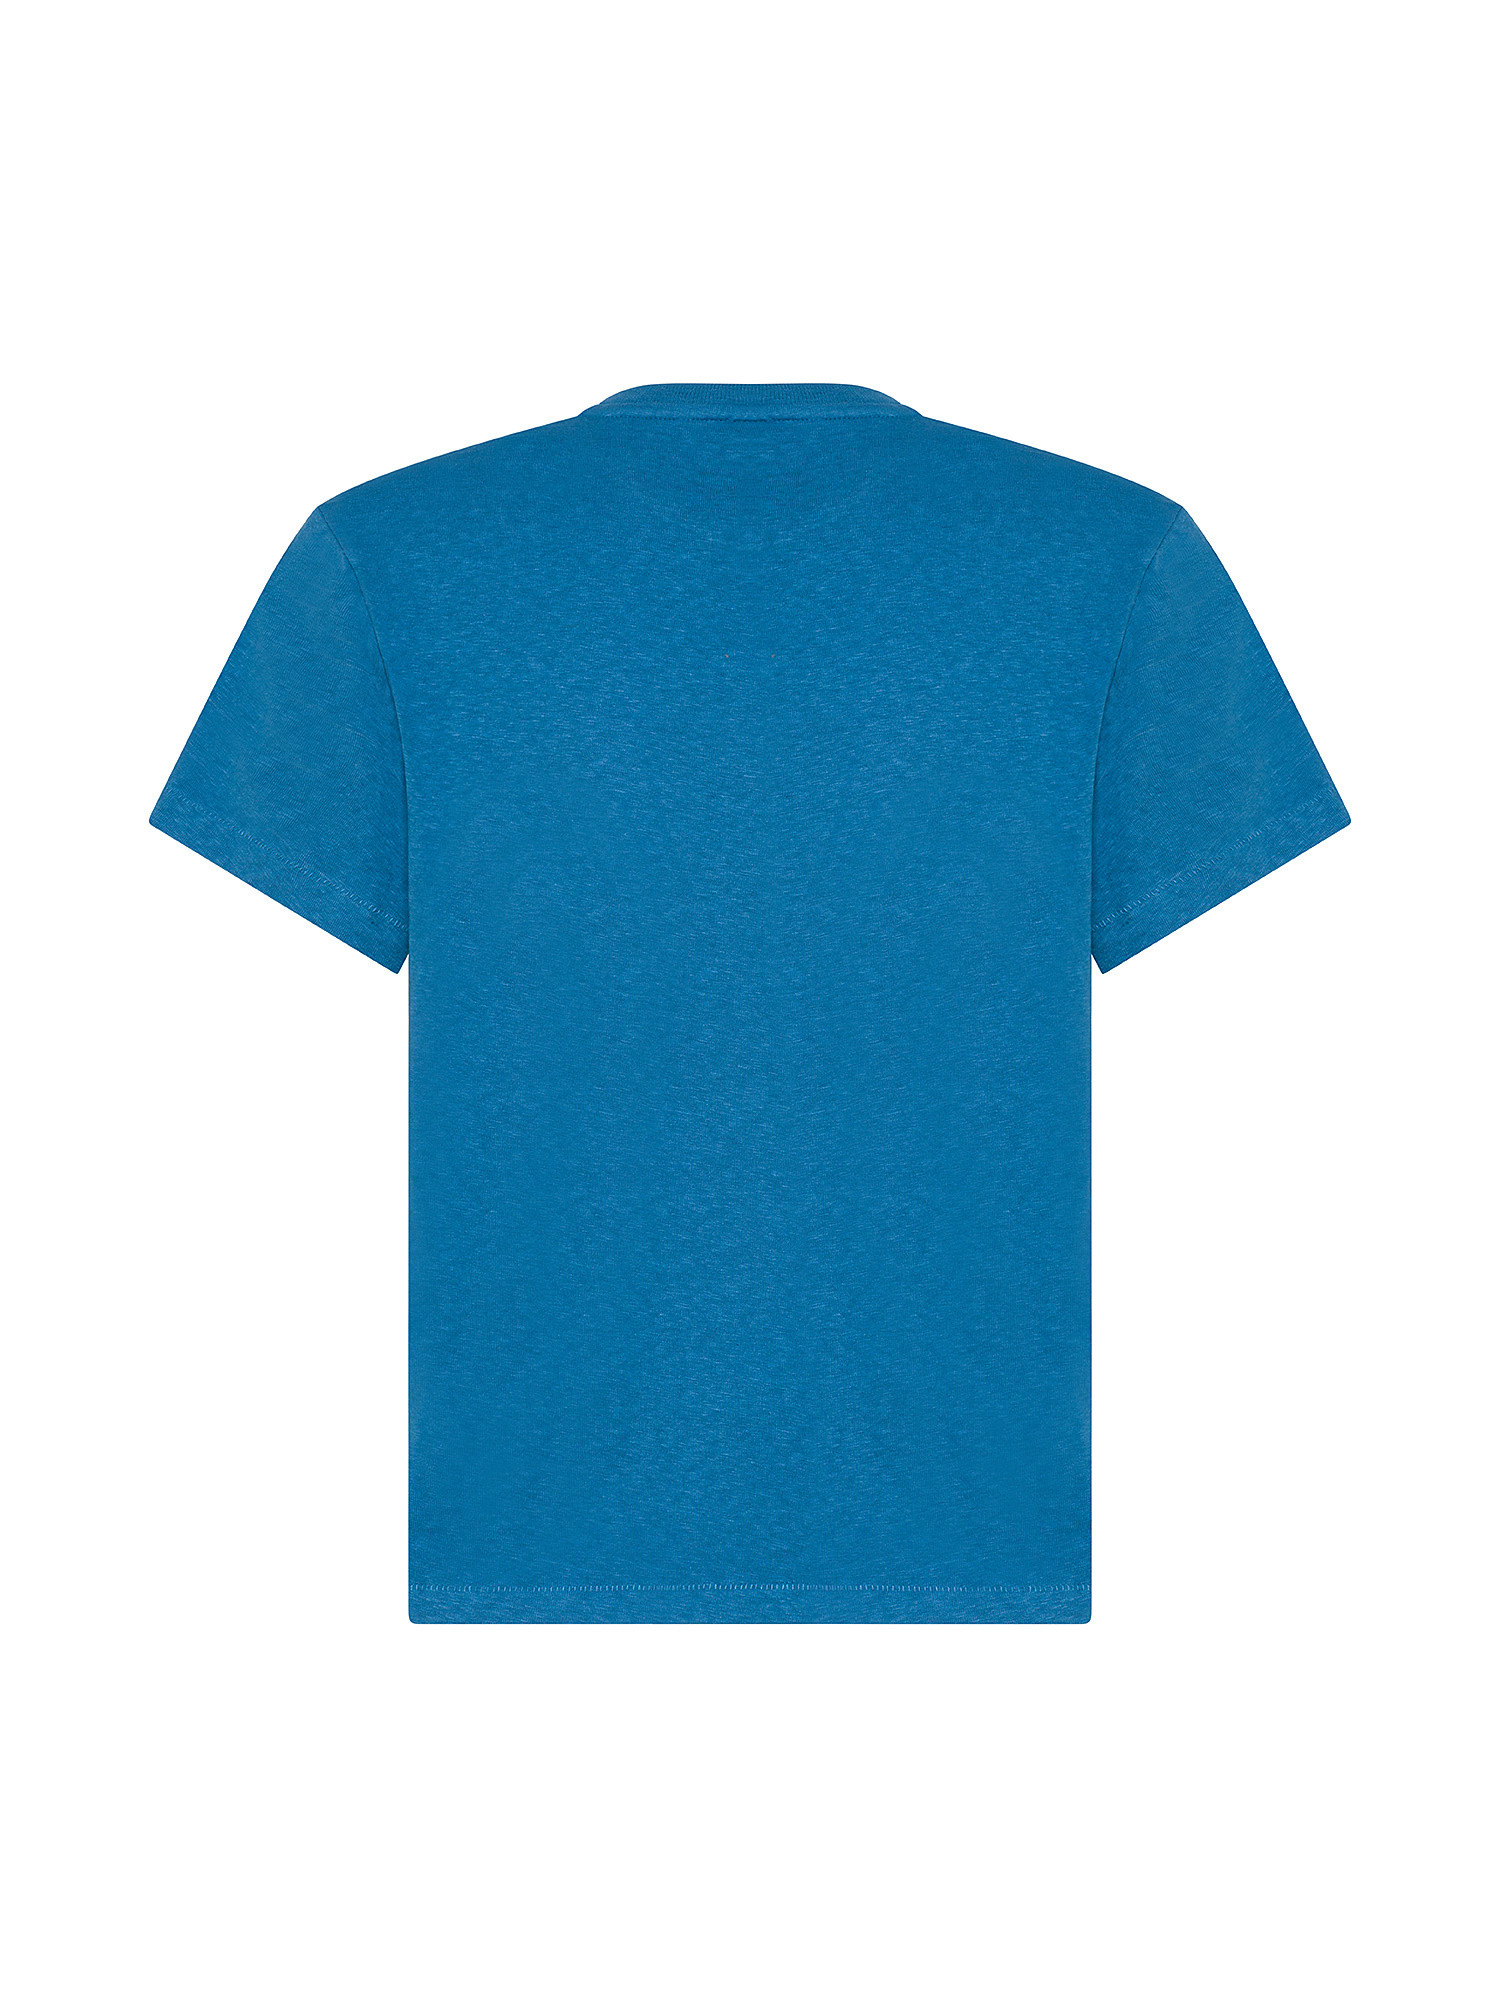 Levi's - T-shirt in cotone, Azzurro, large image number 1